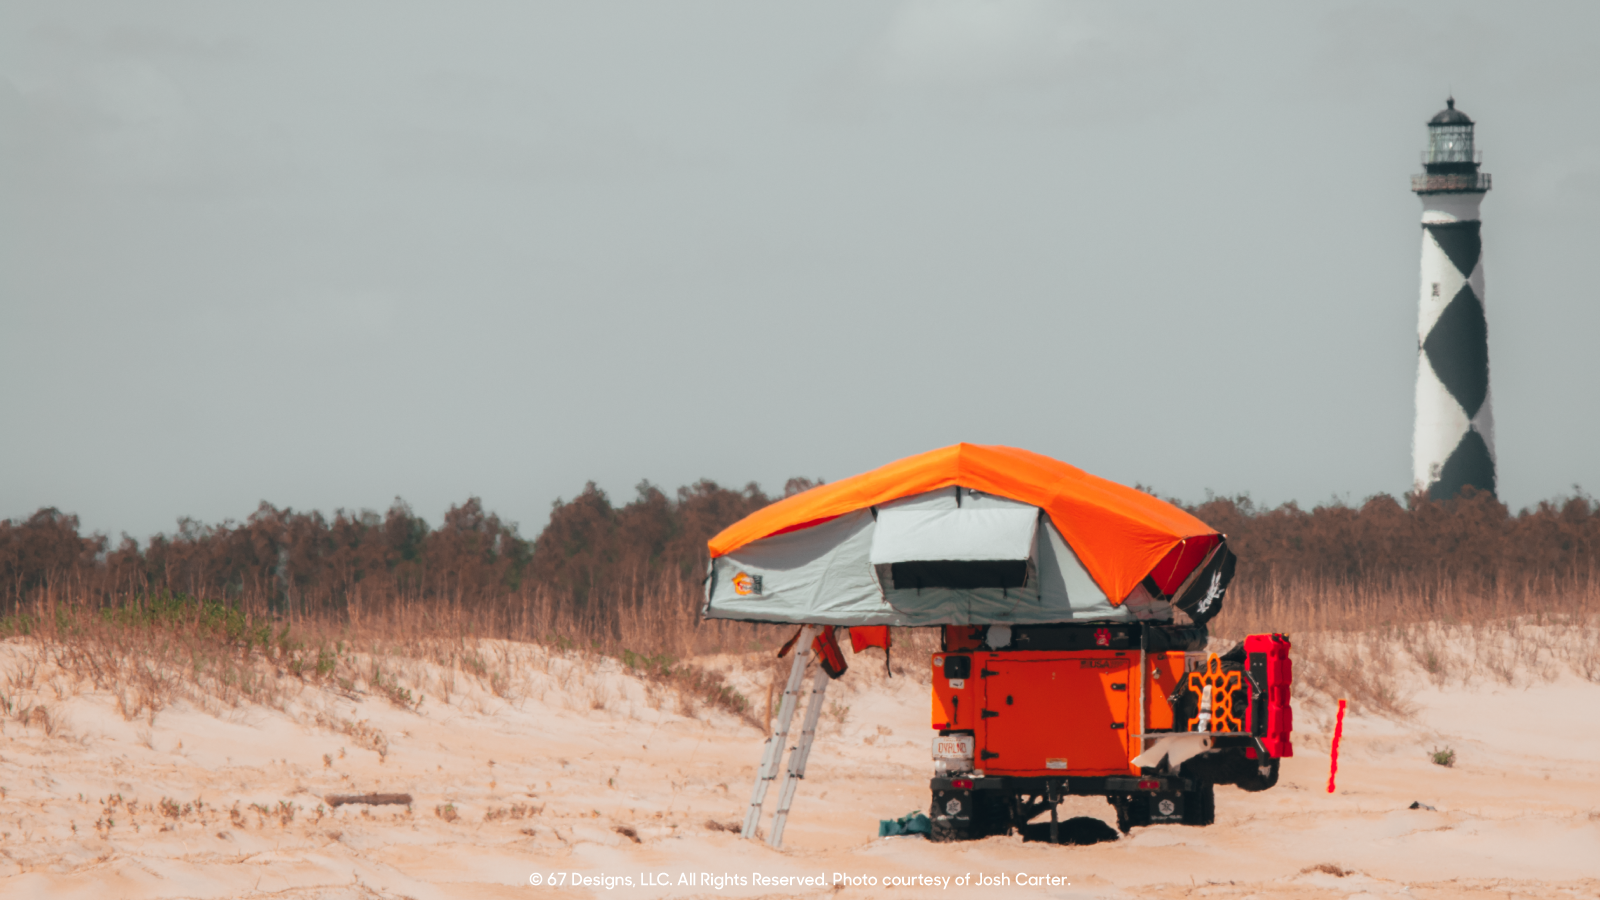 Josh's rooftop tent on a beach